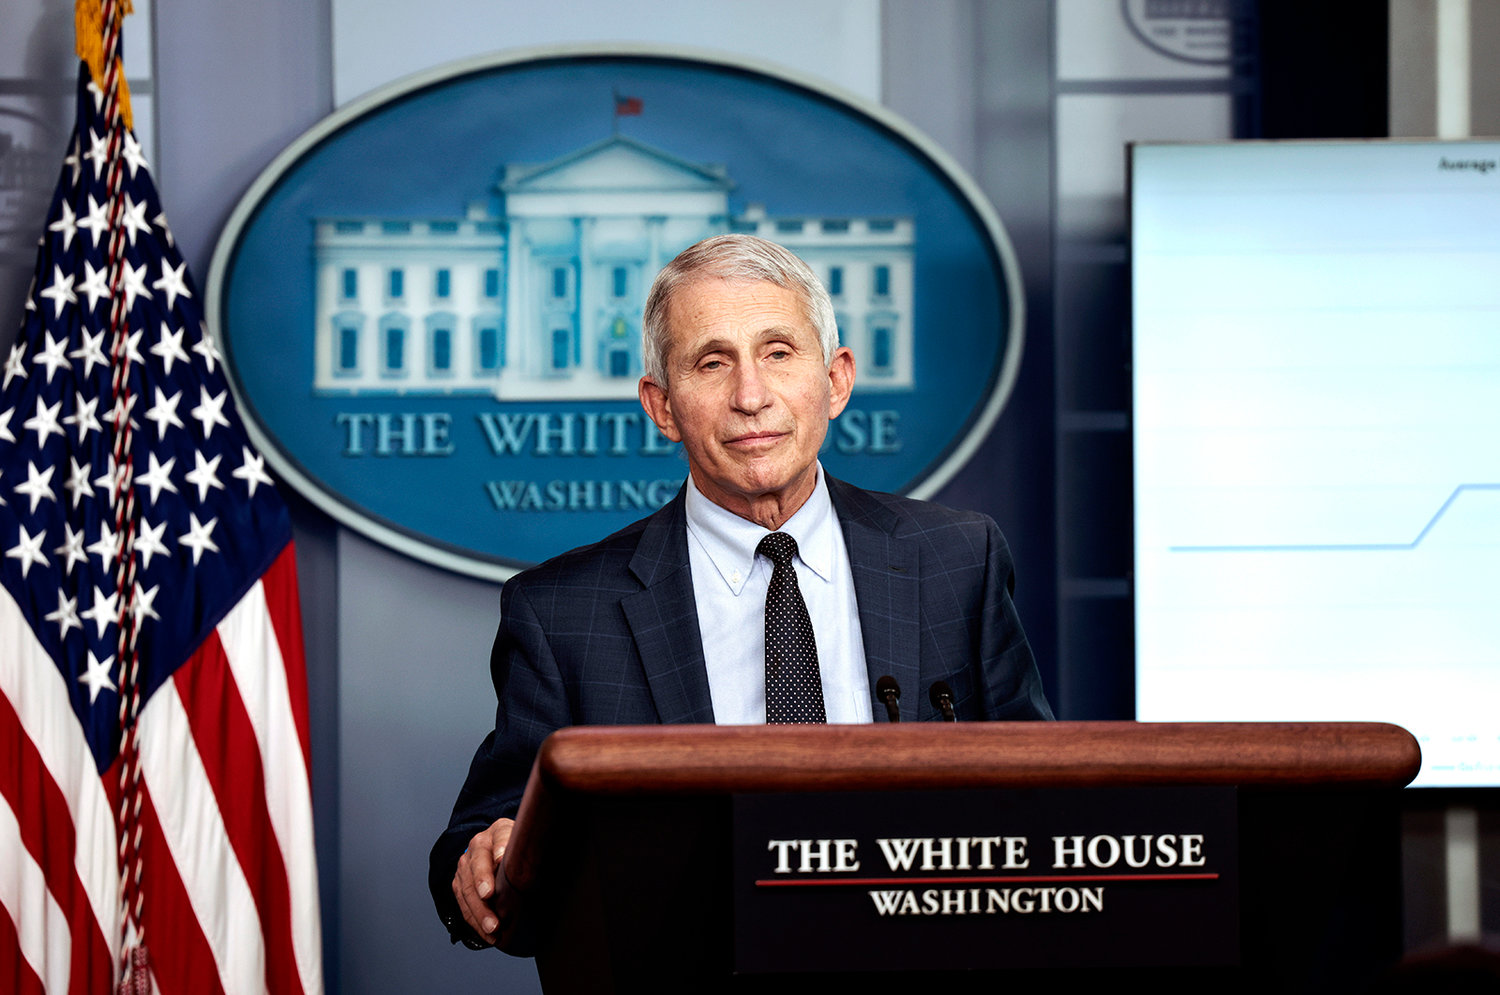 Dr. Anthony Fauci, Director of the National Institute of Allergy and Infectious Diseases and an adviser to President Joe Biden, delivers an update on the omicron COVID-19 variant during a press briefing at the White House on Dec. 1, 2021, in Washington, D.C. (Anna Moneymaker/Getty Images/TNS)